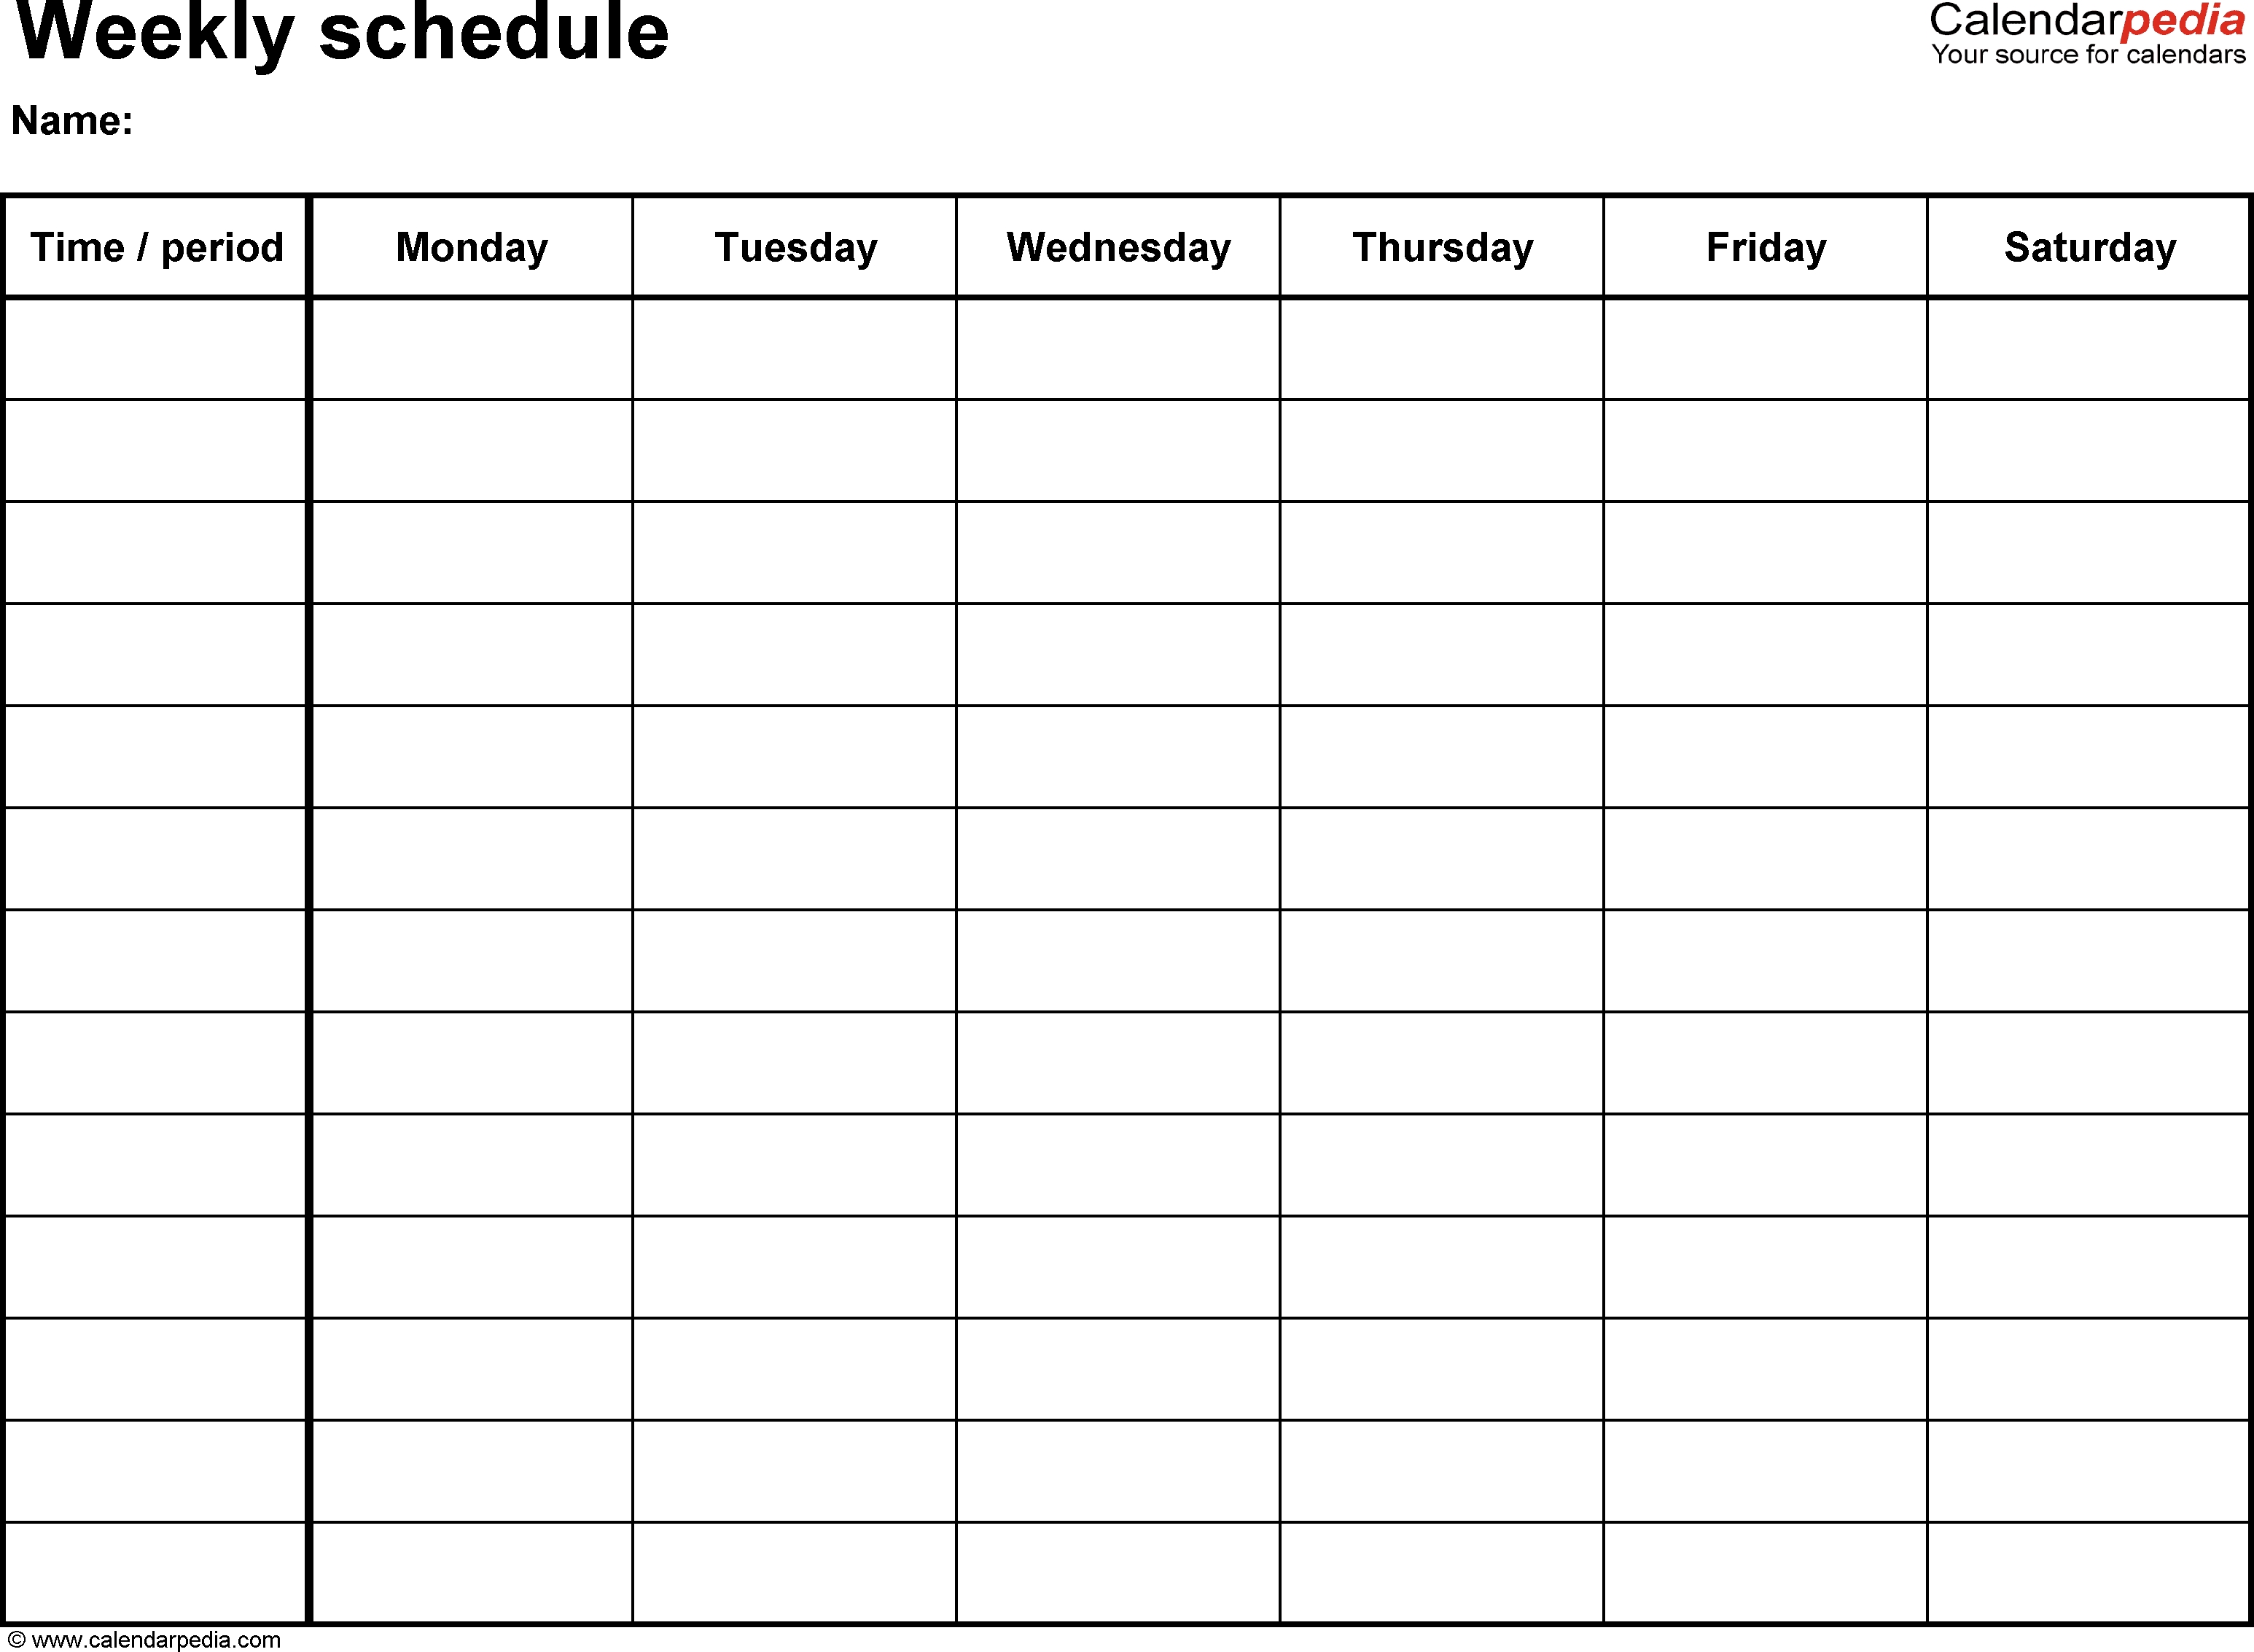 Free Weekly Schedule Templates For Word - 18 Templates regarding Printable Weekly Schedule Monday Through Friday